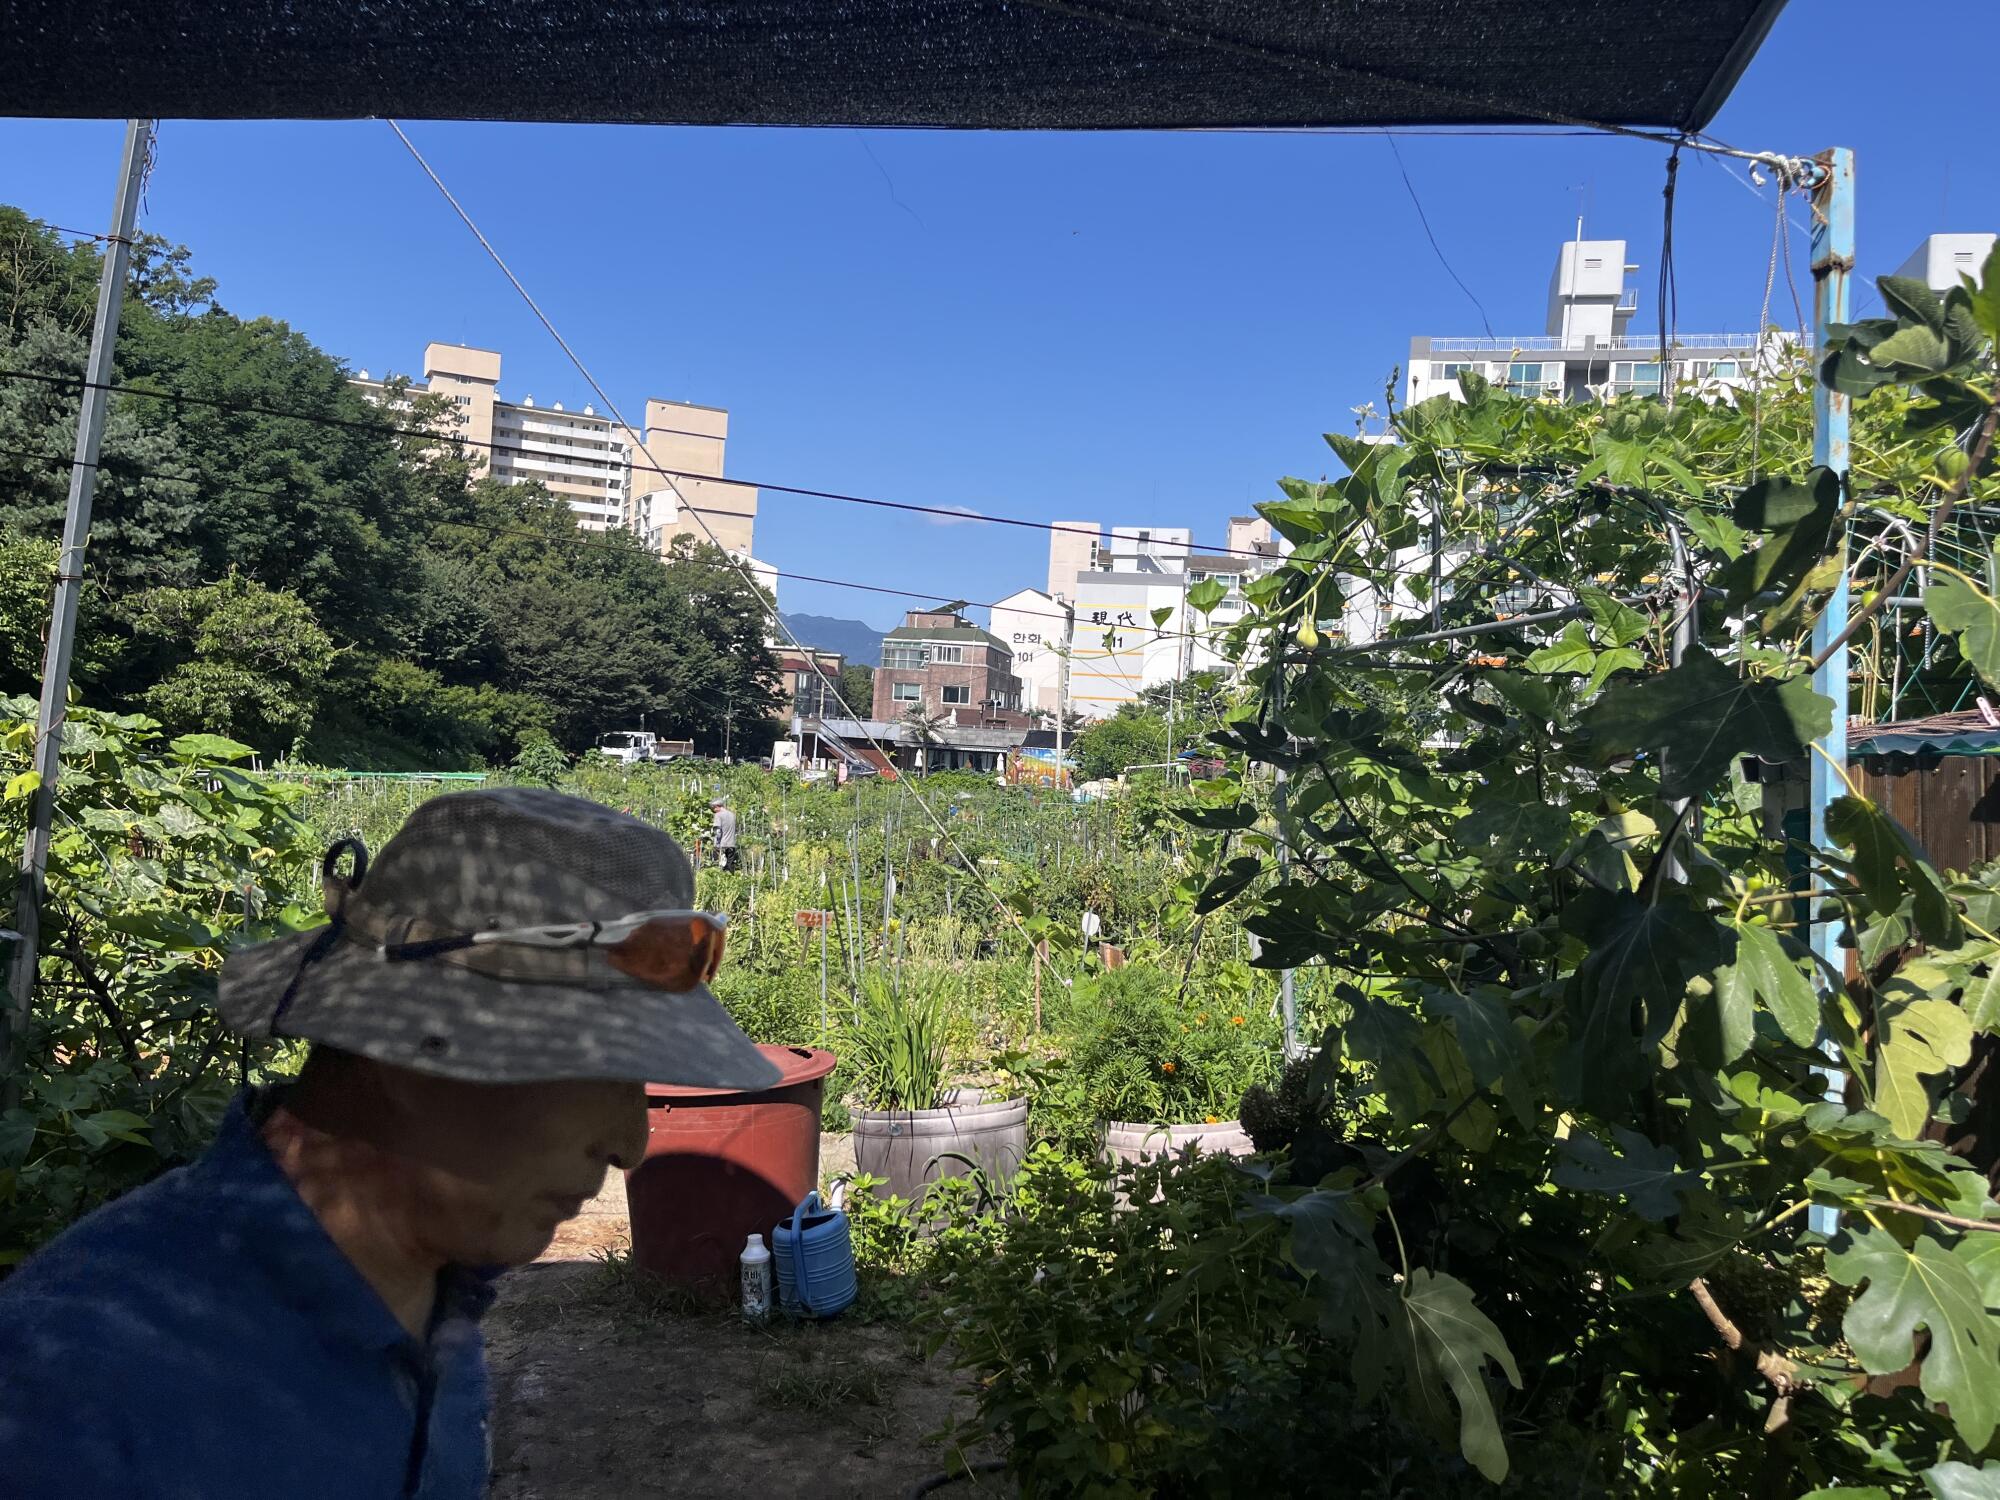 A man in a brimmed hat works among plants, with tall buildings in the distance